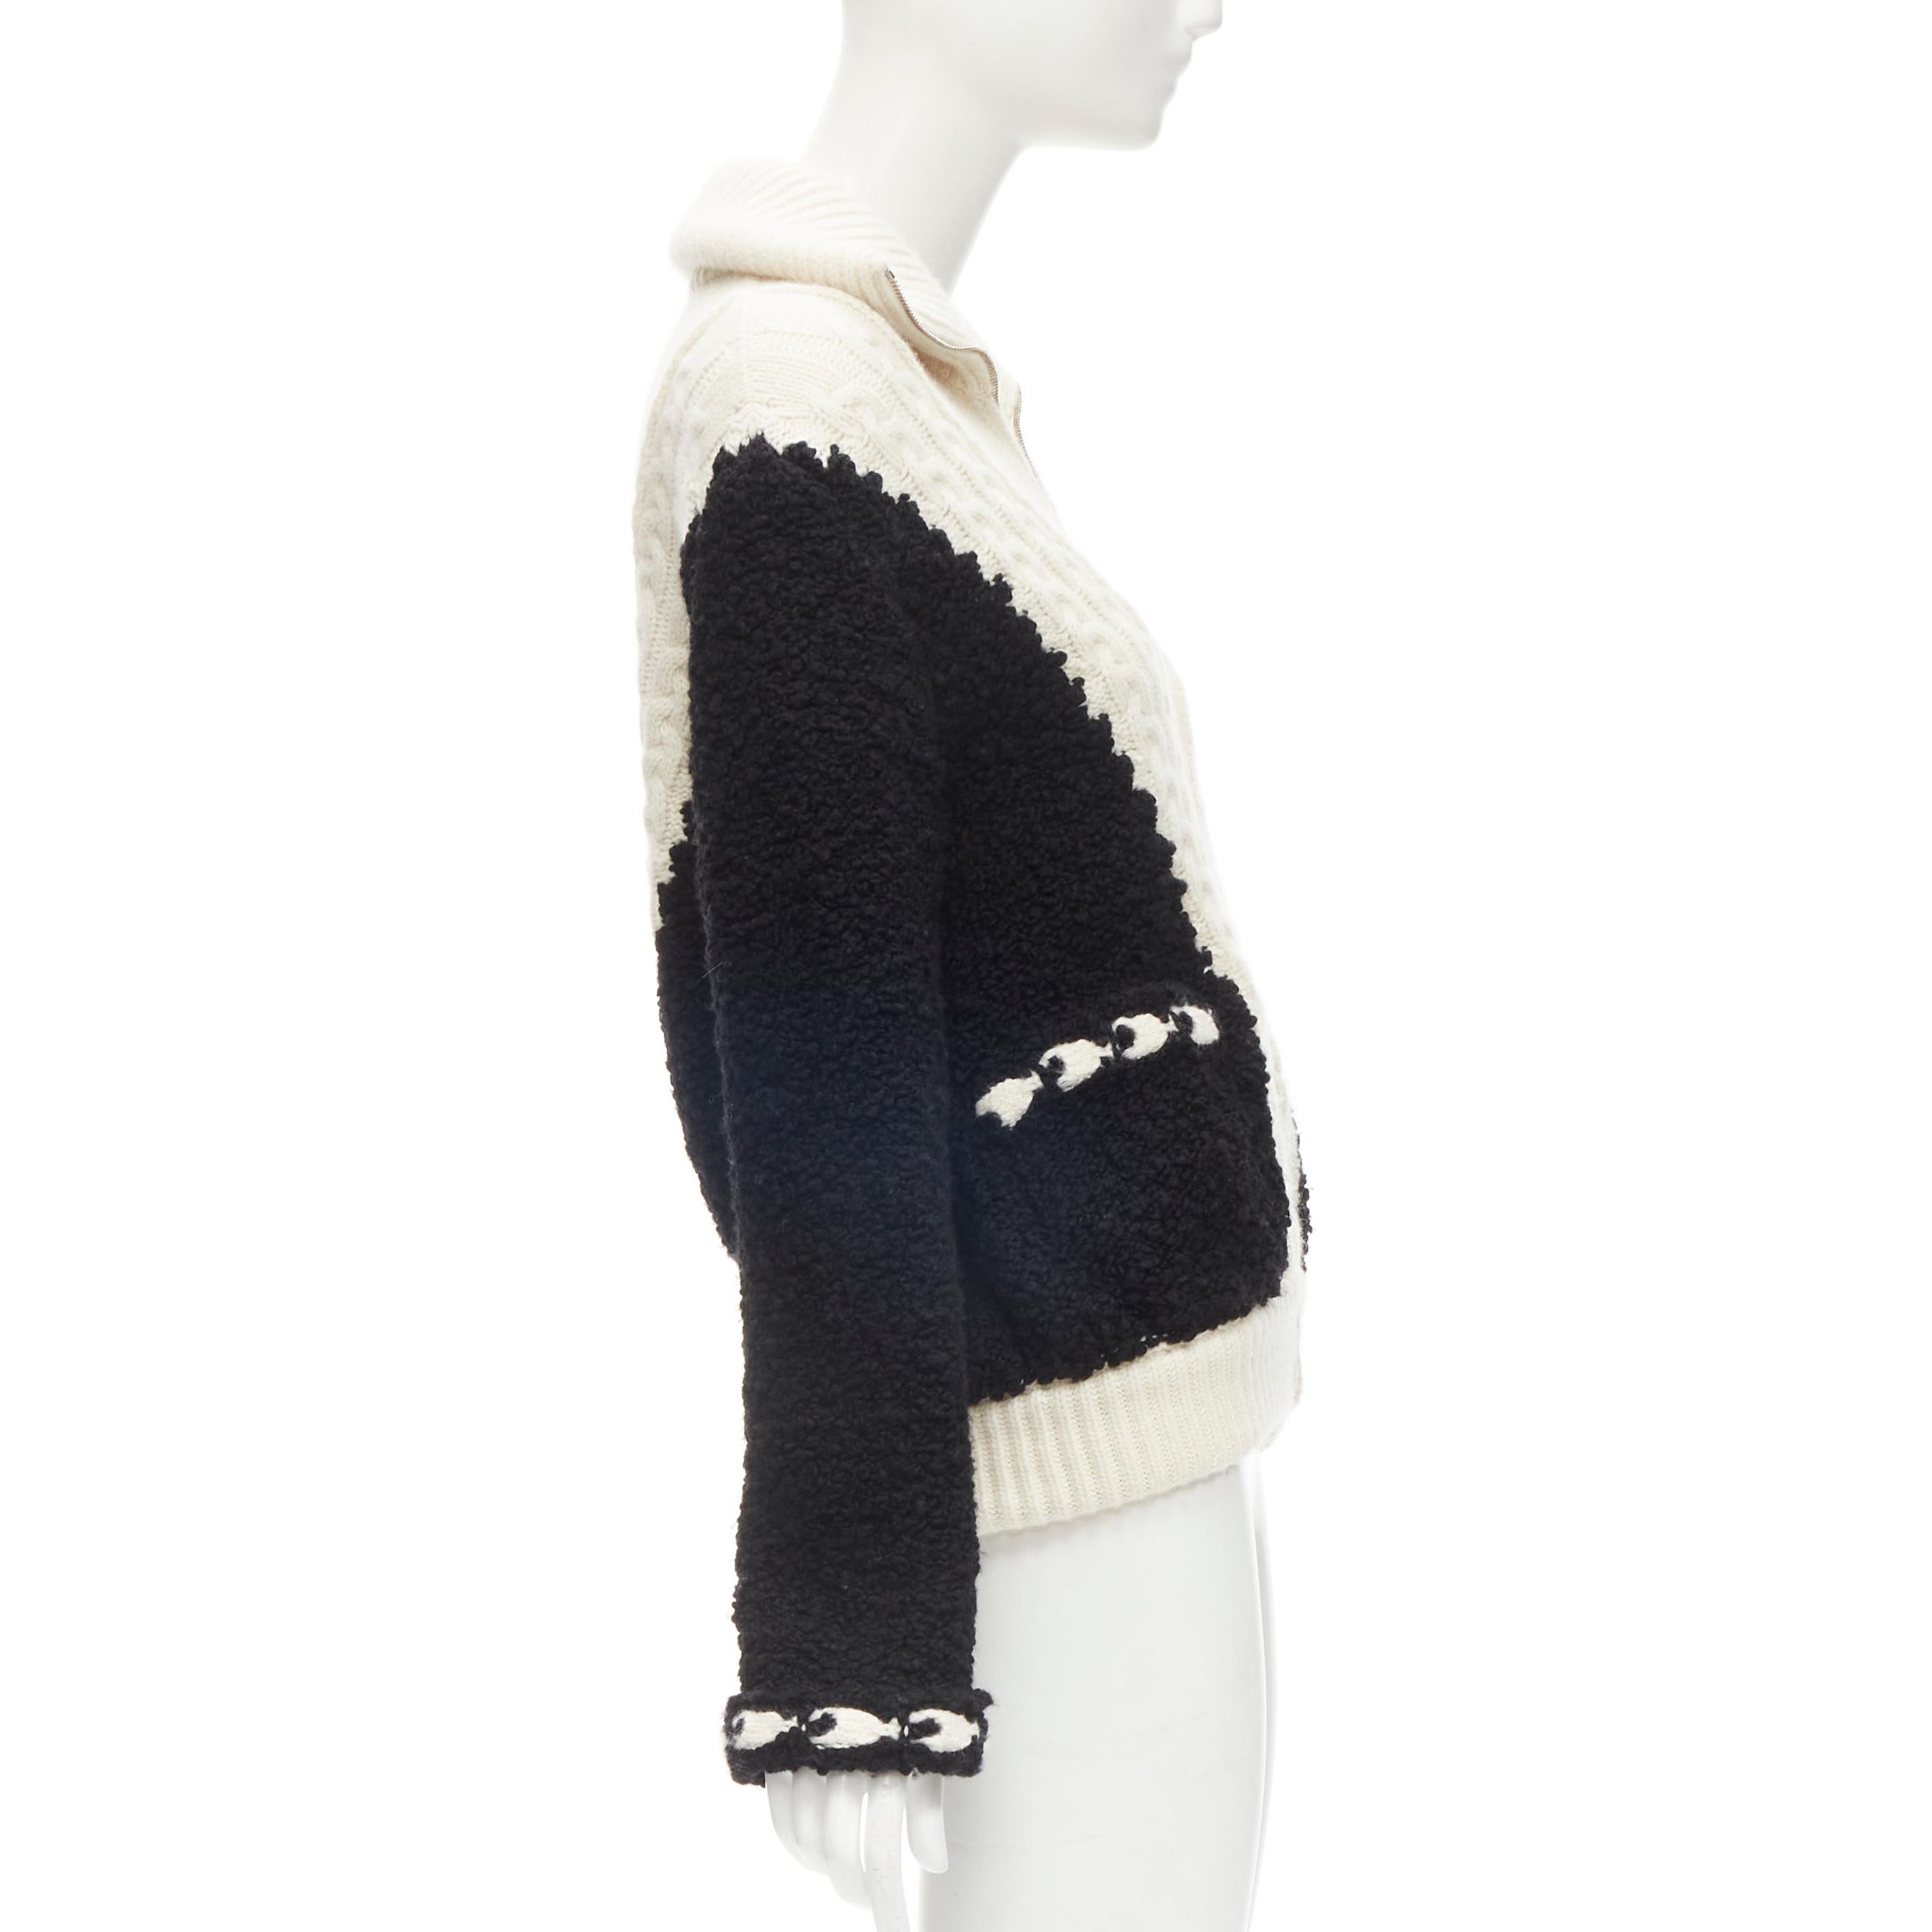 CHANEL black boucle cream cable knit faux layered cardigan jacket FR34 XS 1